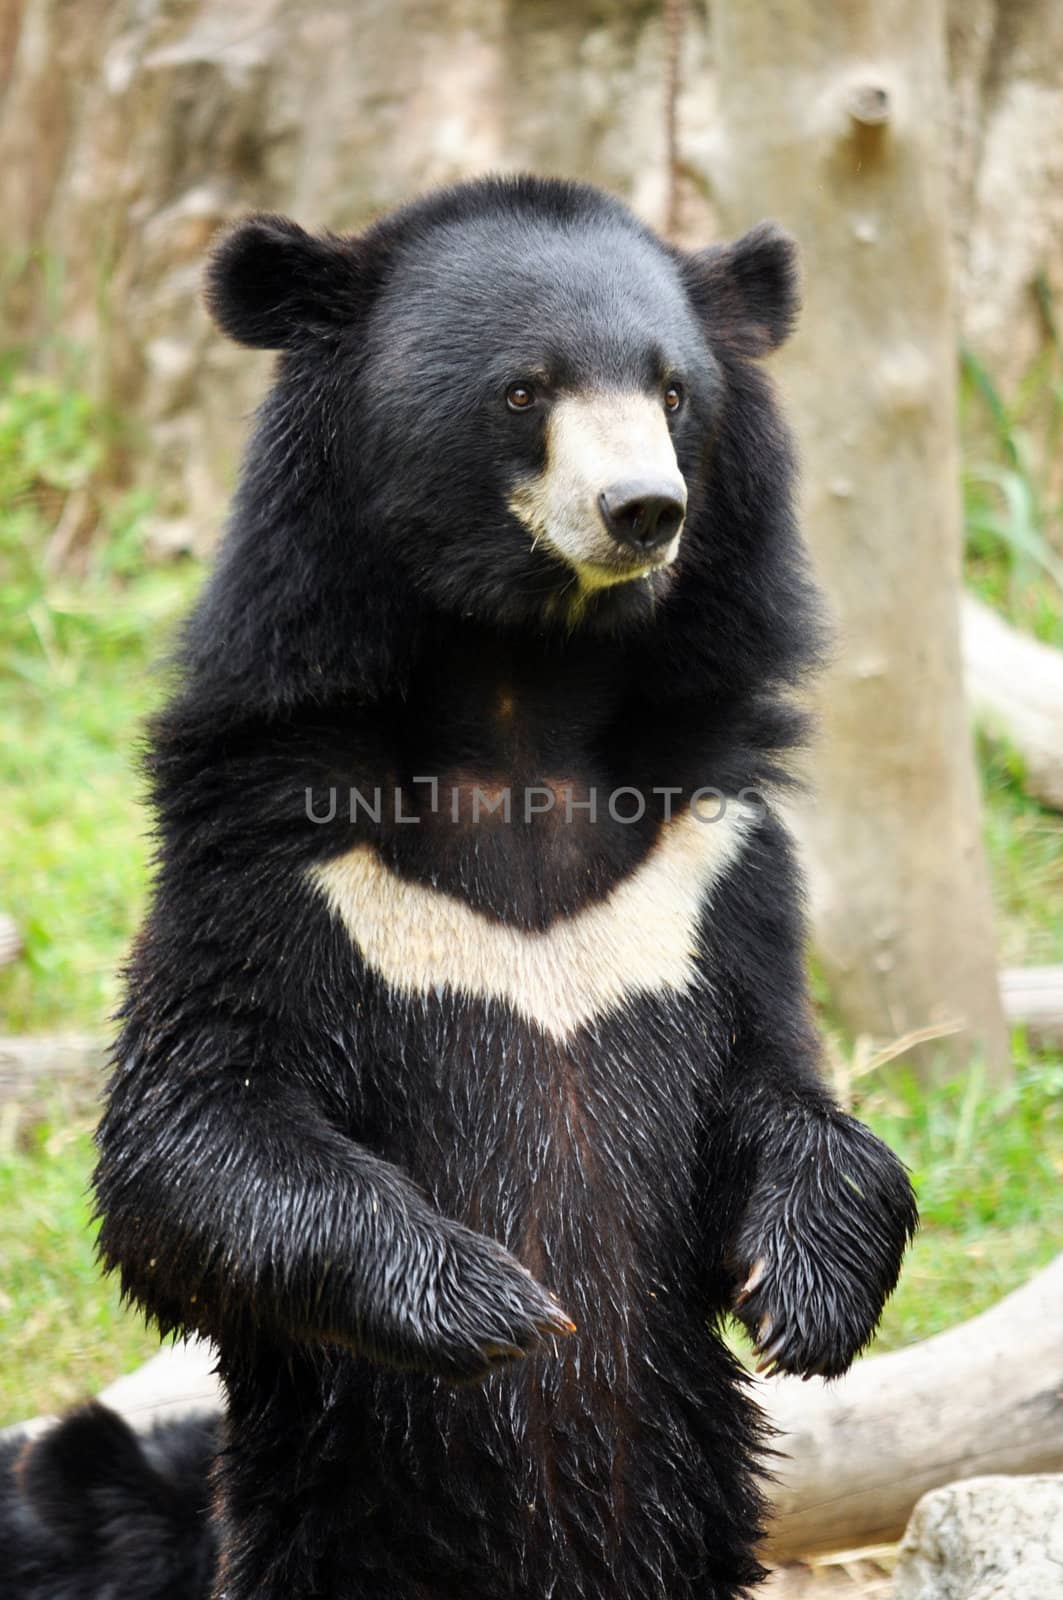 Asian black bears are similar in general appearance to brown bears, but are more lightly built and more slender limbed.